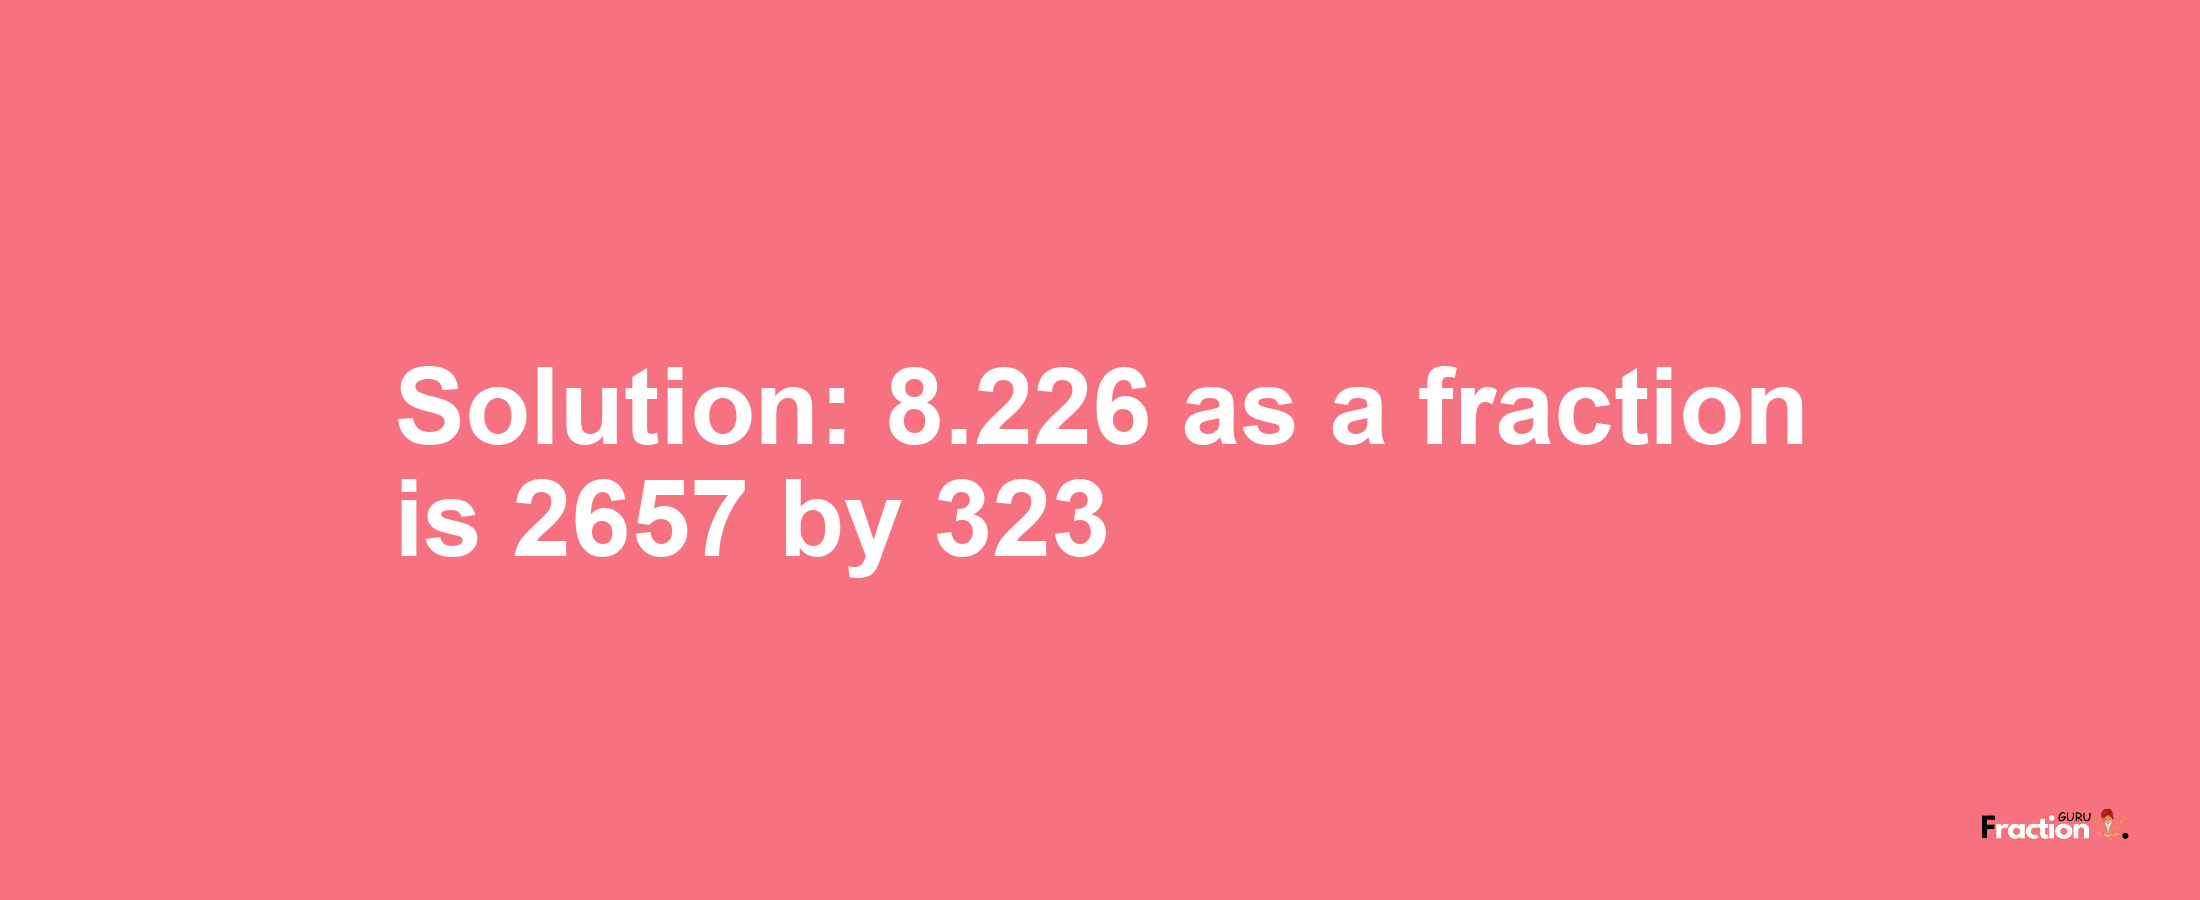 Solution:8.226 as a fraction is 2657/323